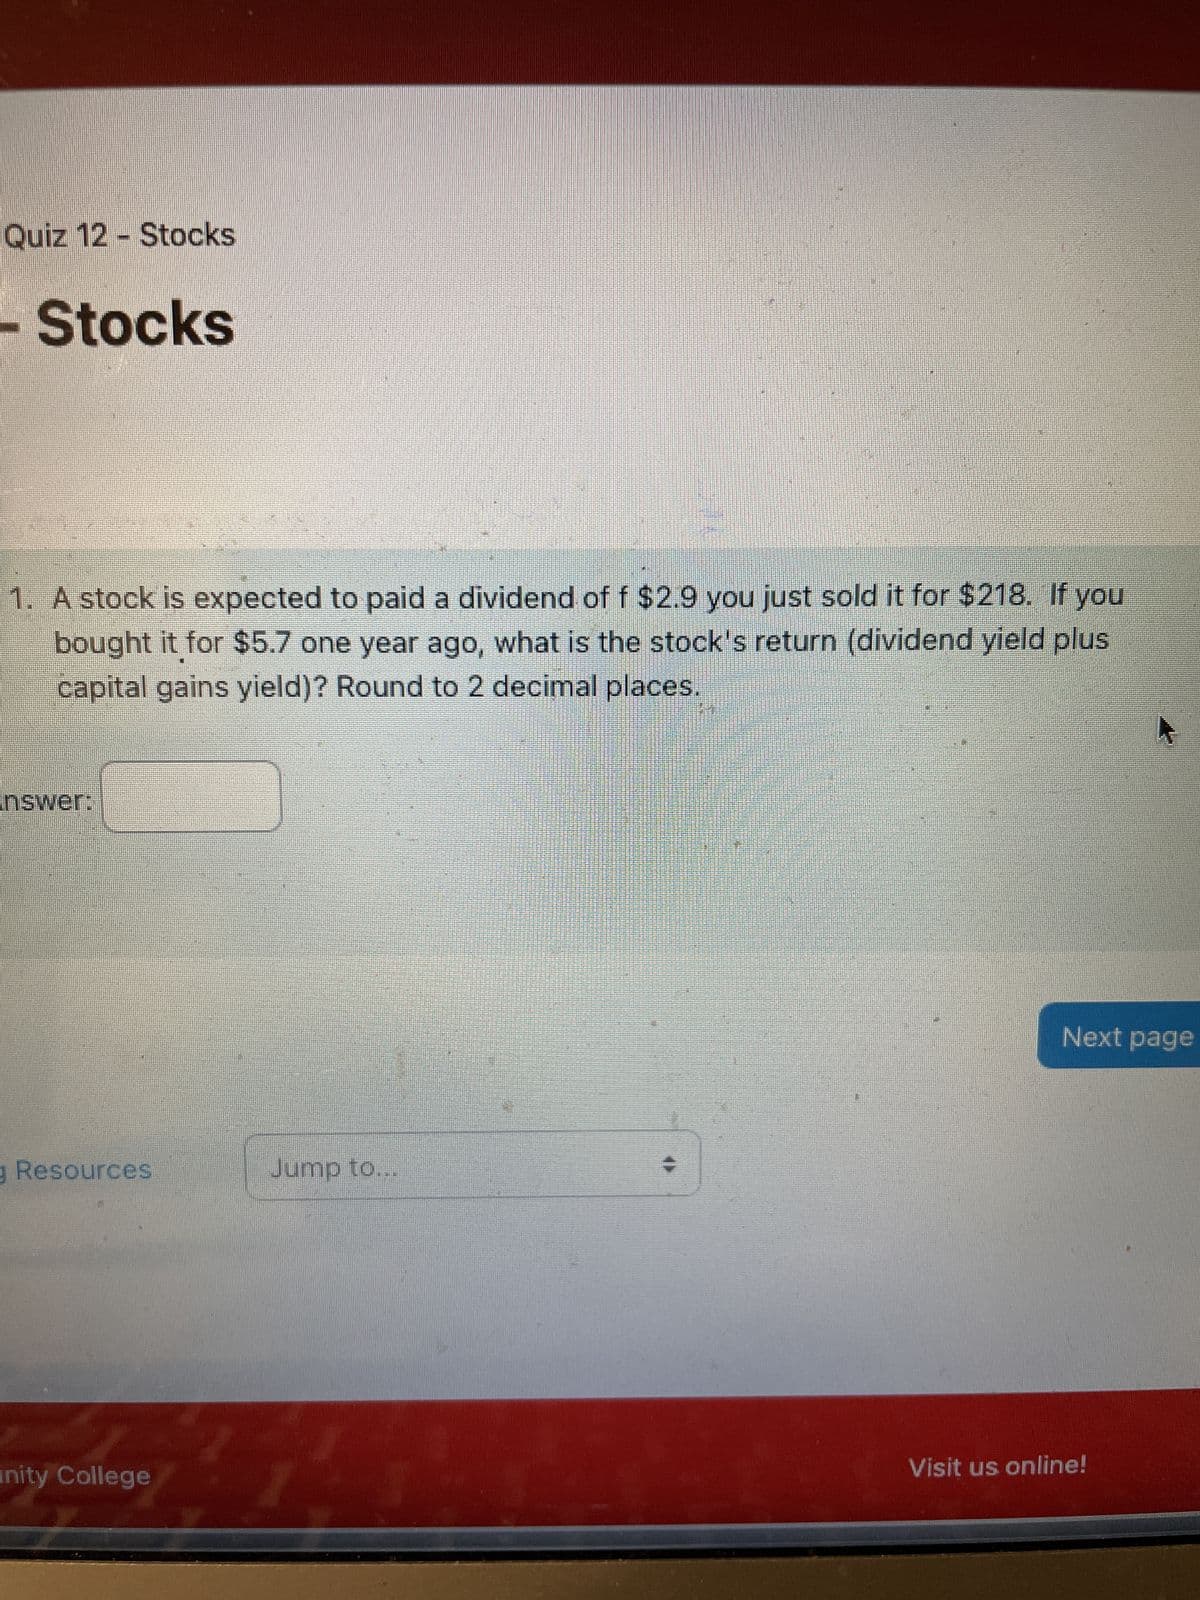 Quiz 12 - Stocks
Stocks
1. A stock is expected to paid a dividend of f $2.9 you just sold it for $218. If you
bought it for $5.7 one year ago, what is the stock's return (dividend yield plus
capital gains yield)? Round to 2 decimal places.
nswer:
Resources
Jump to...
nity College
Next page
Visit us online!